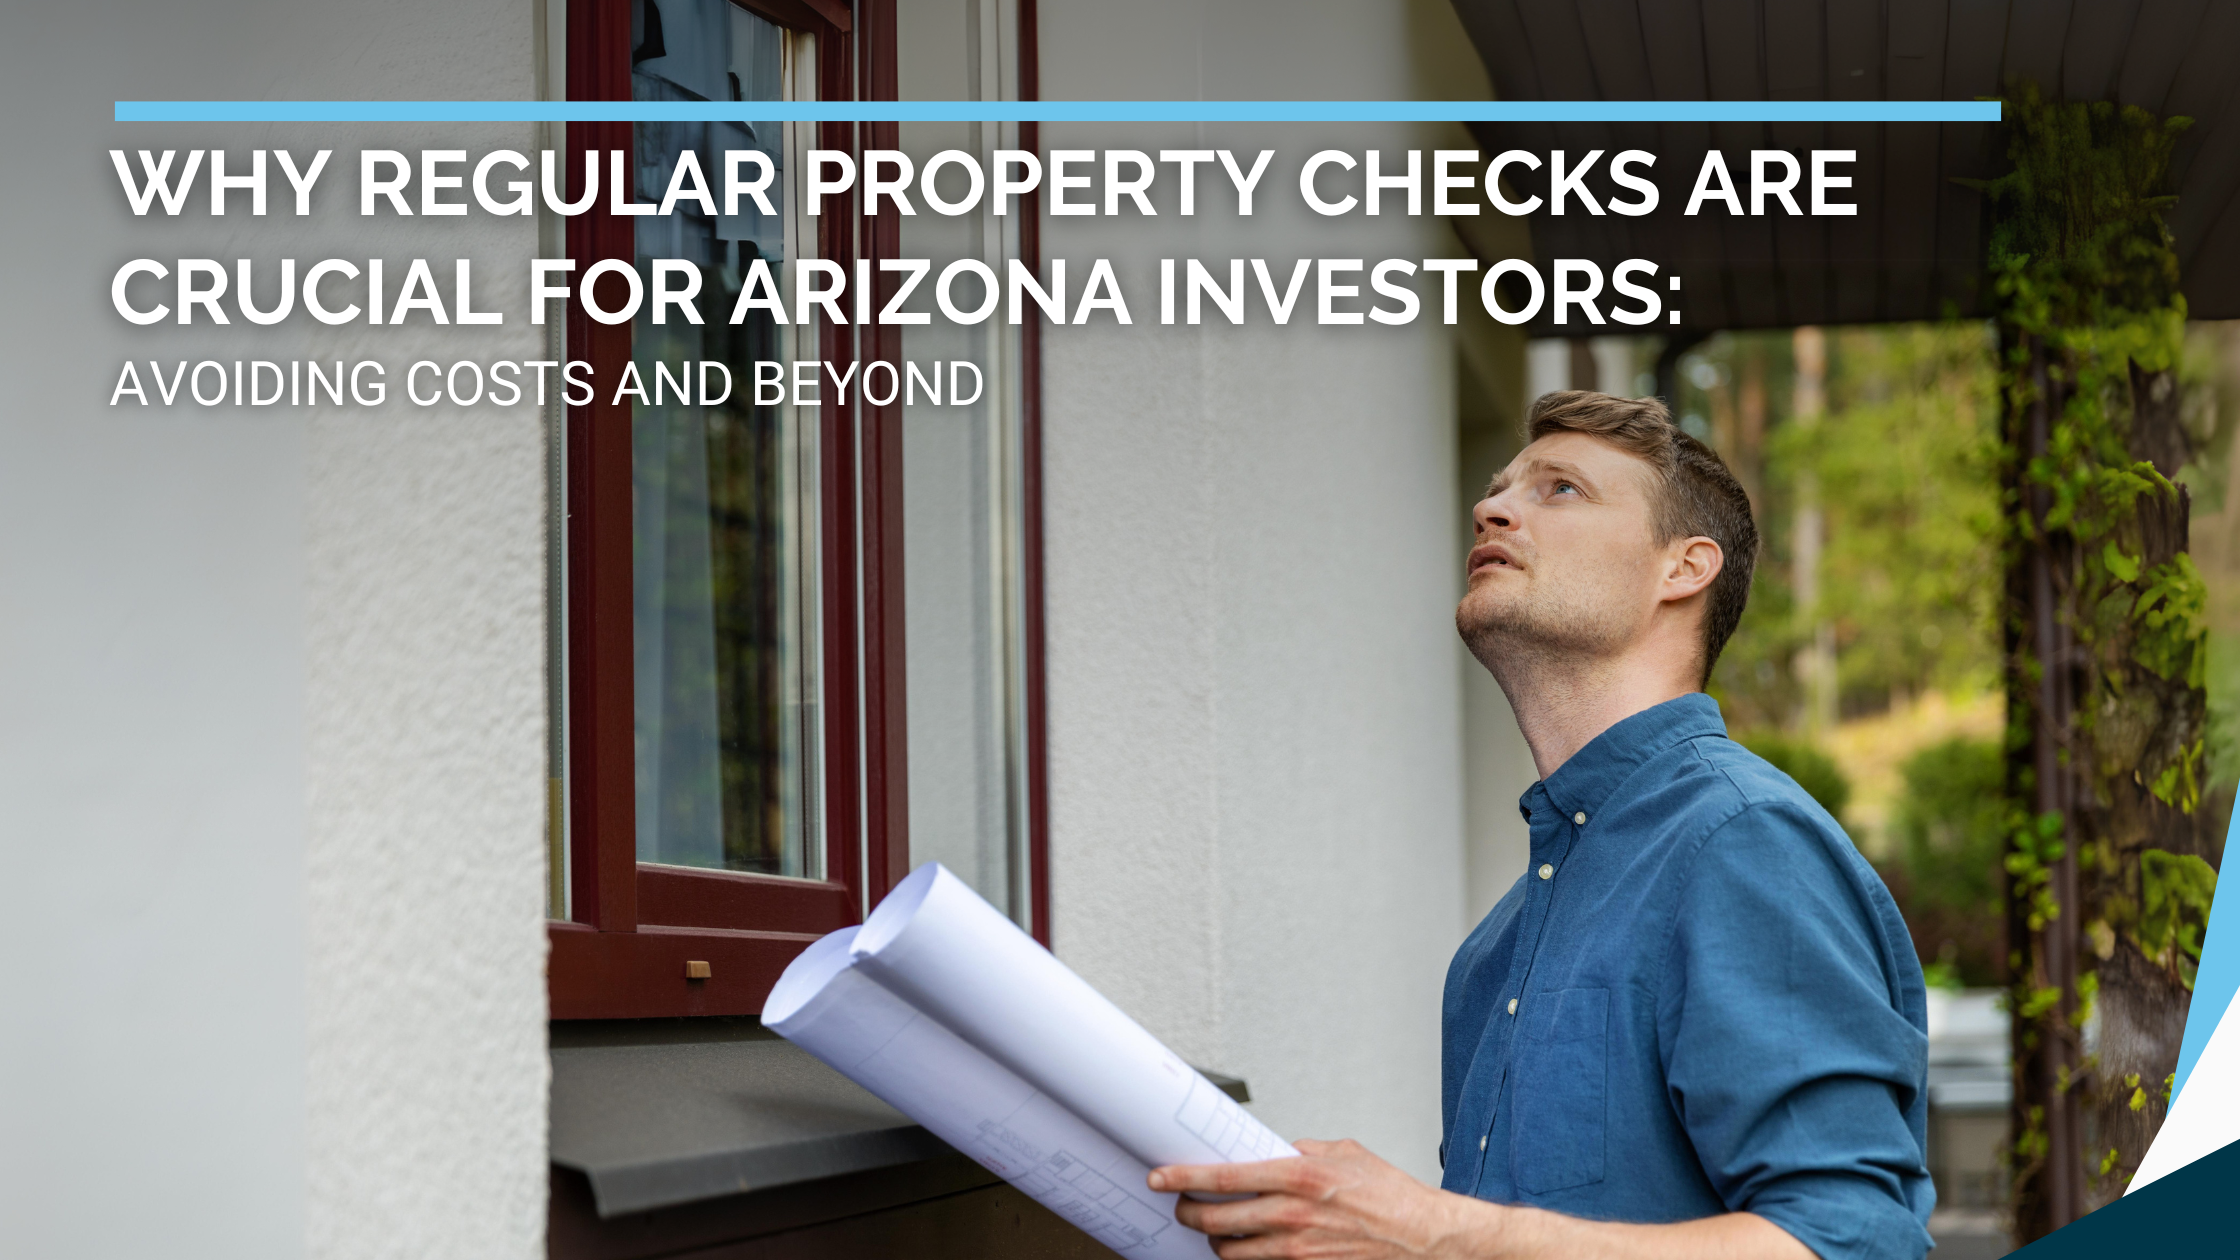 Why Regular Property Checks are Crucial for Arizona Investors: Avoiding Costs and Beyond